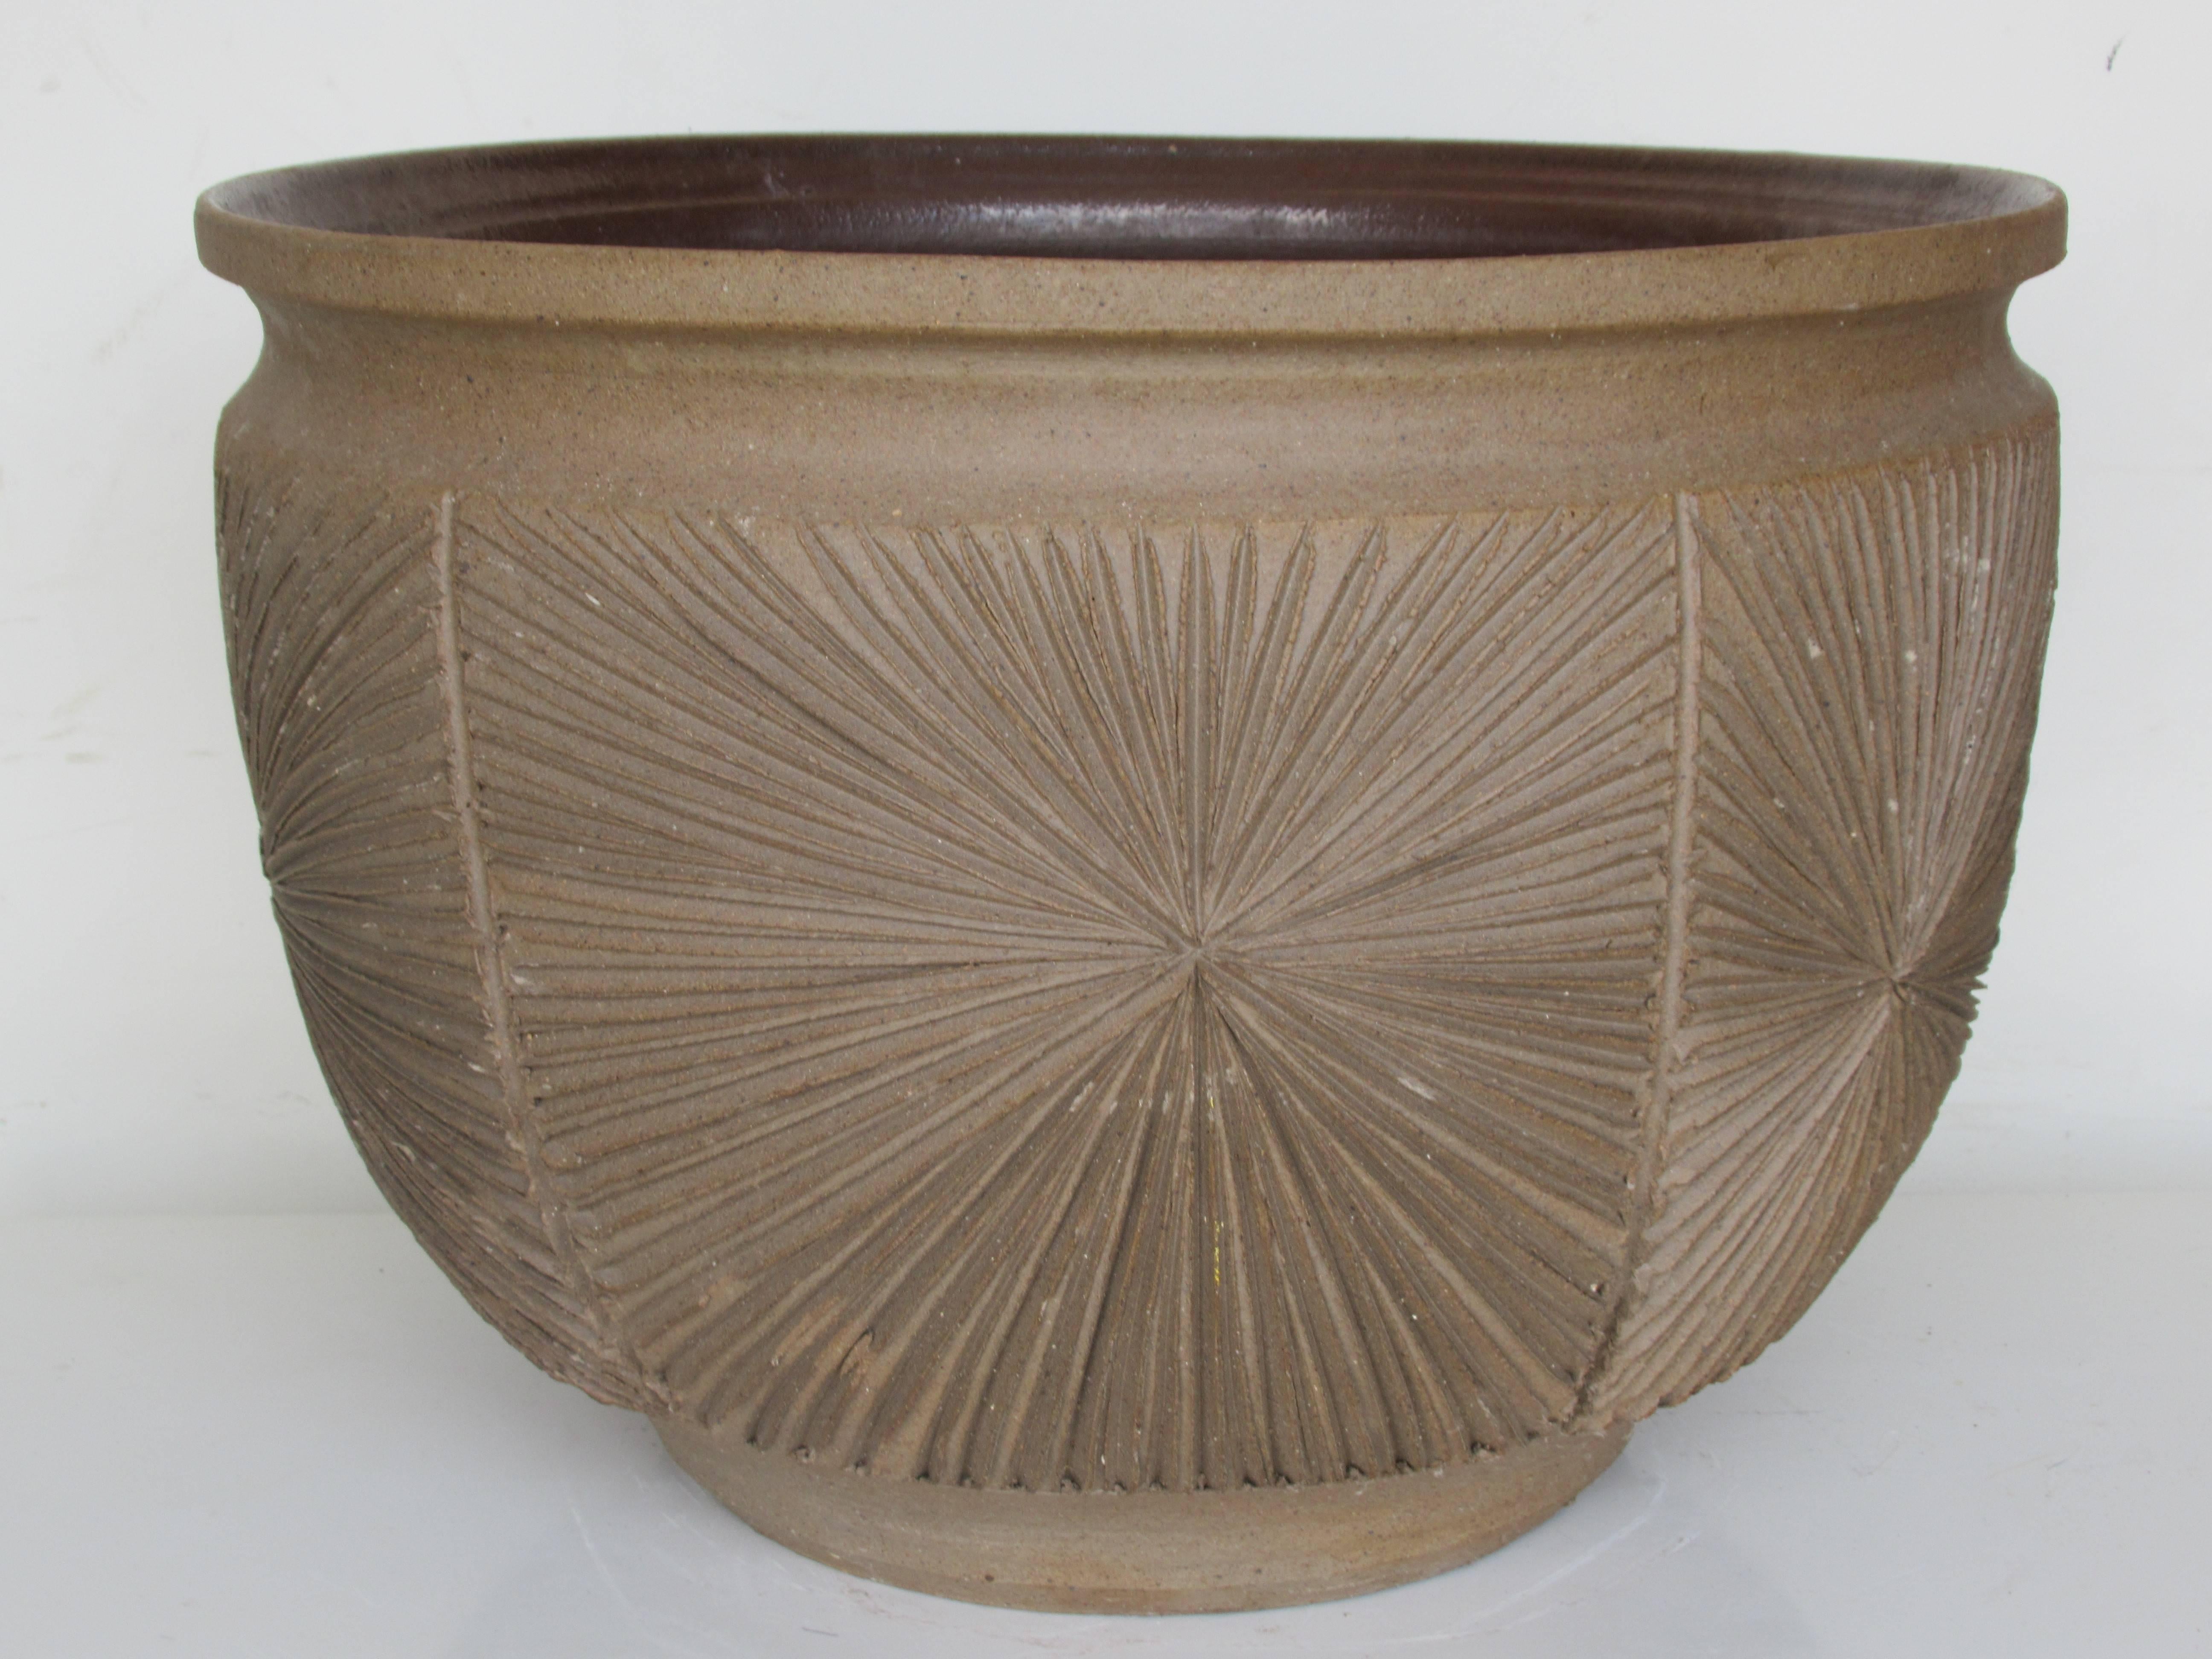 A large Architectural Pottery stoneware bowl planter from the Robert Maxwell / David Cressey collaboration with Earthgender, circa 1970s. The planter has a rounded lip with an incised all-over sunburst decoration. It is not glazed on the outside -